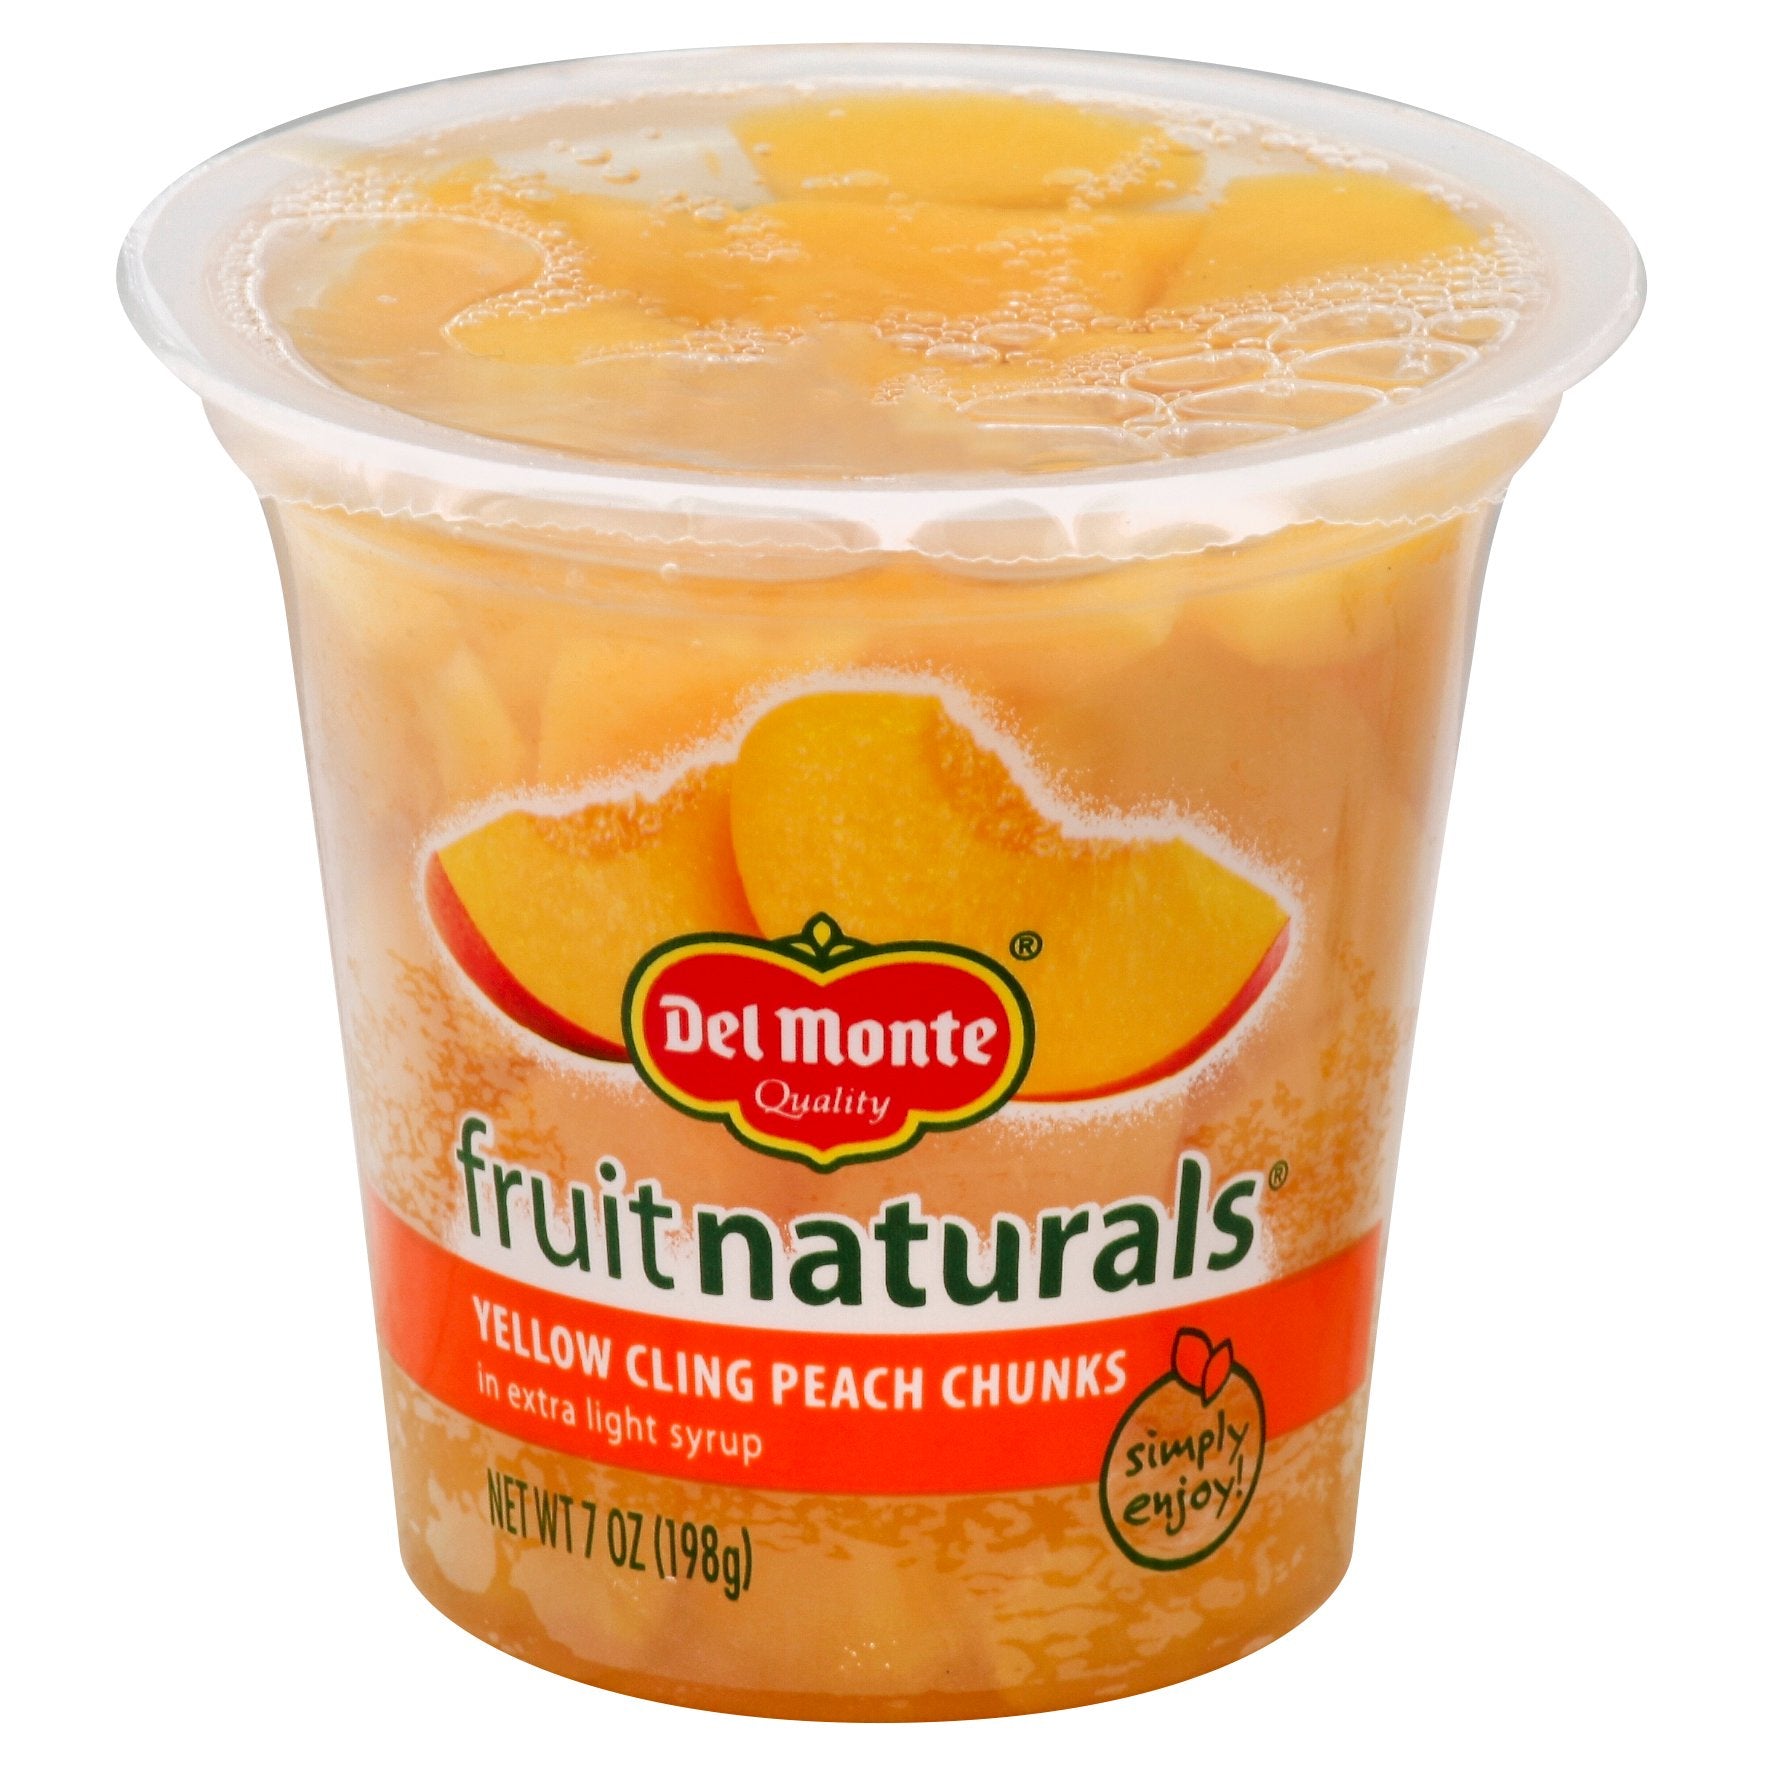 Peach Chunks in Extra Light Syrup/Fruit Naturals